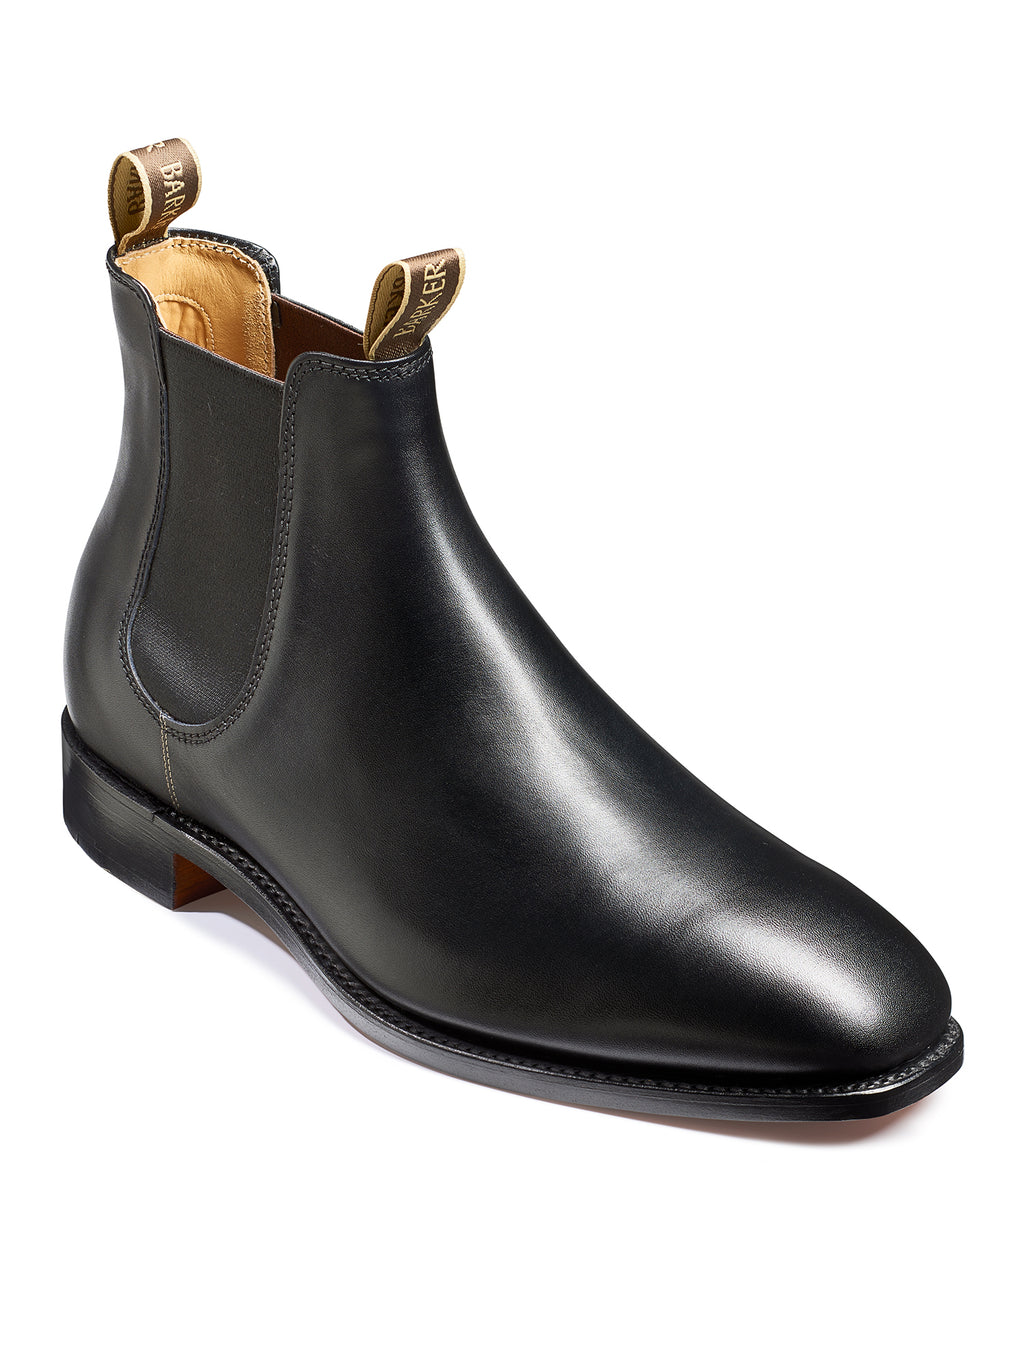 mansfield black calf boot barker shoes